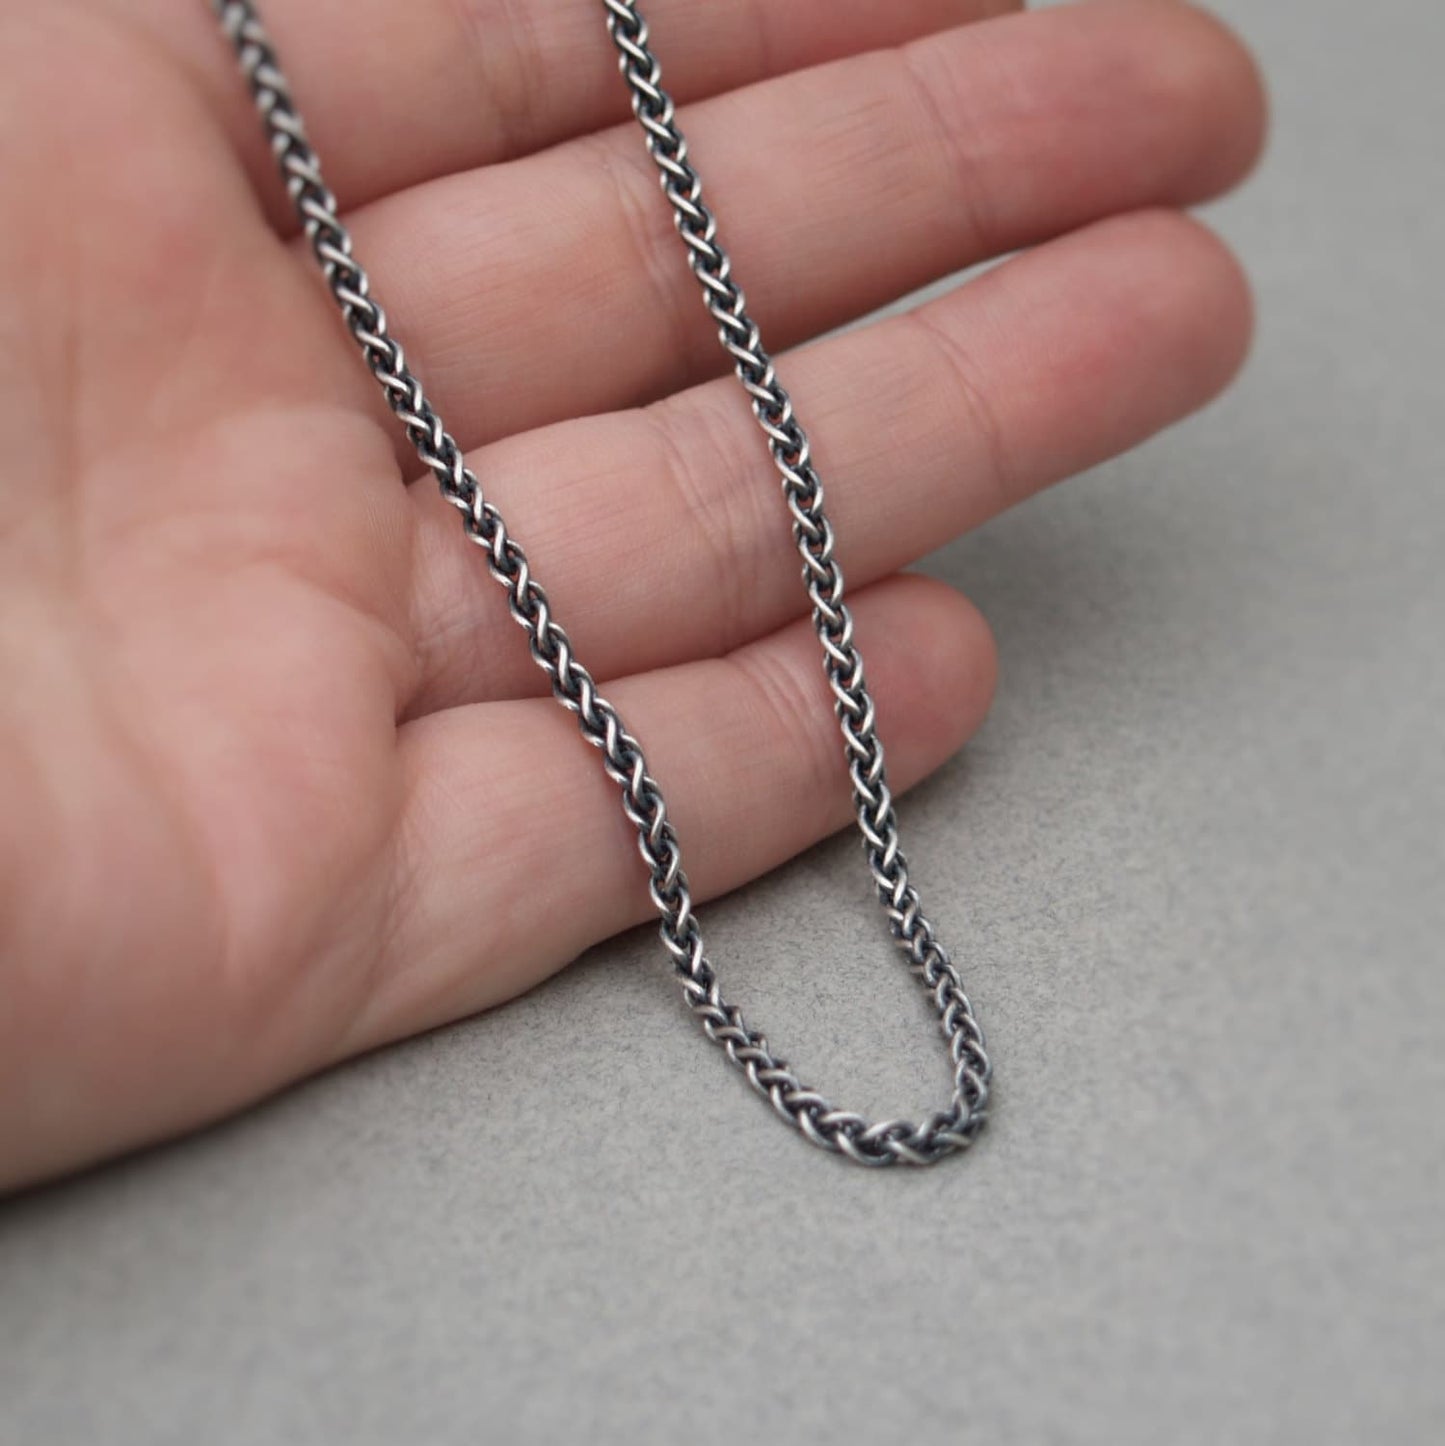 Oxidised or polished silver 2.5mm wide spiga chain